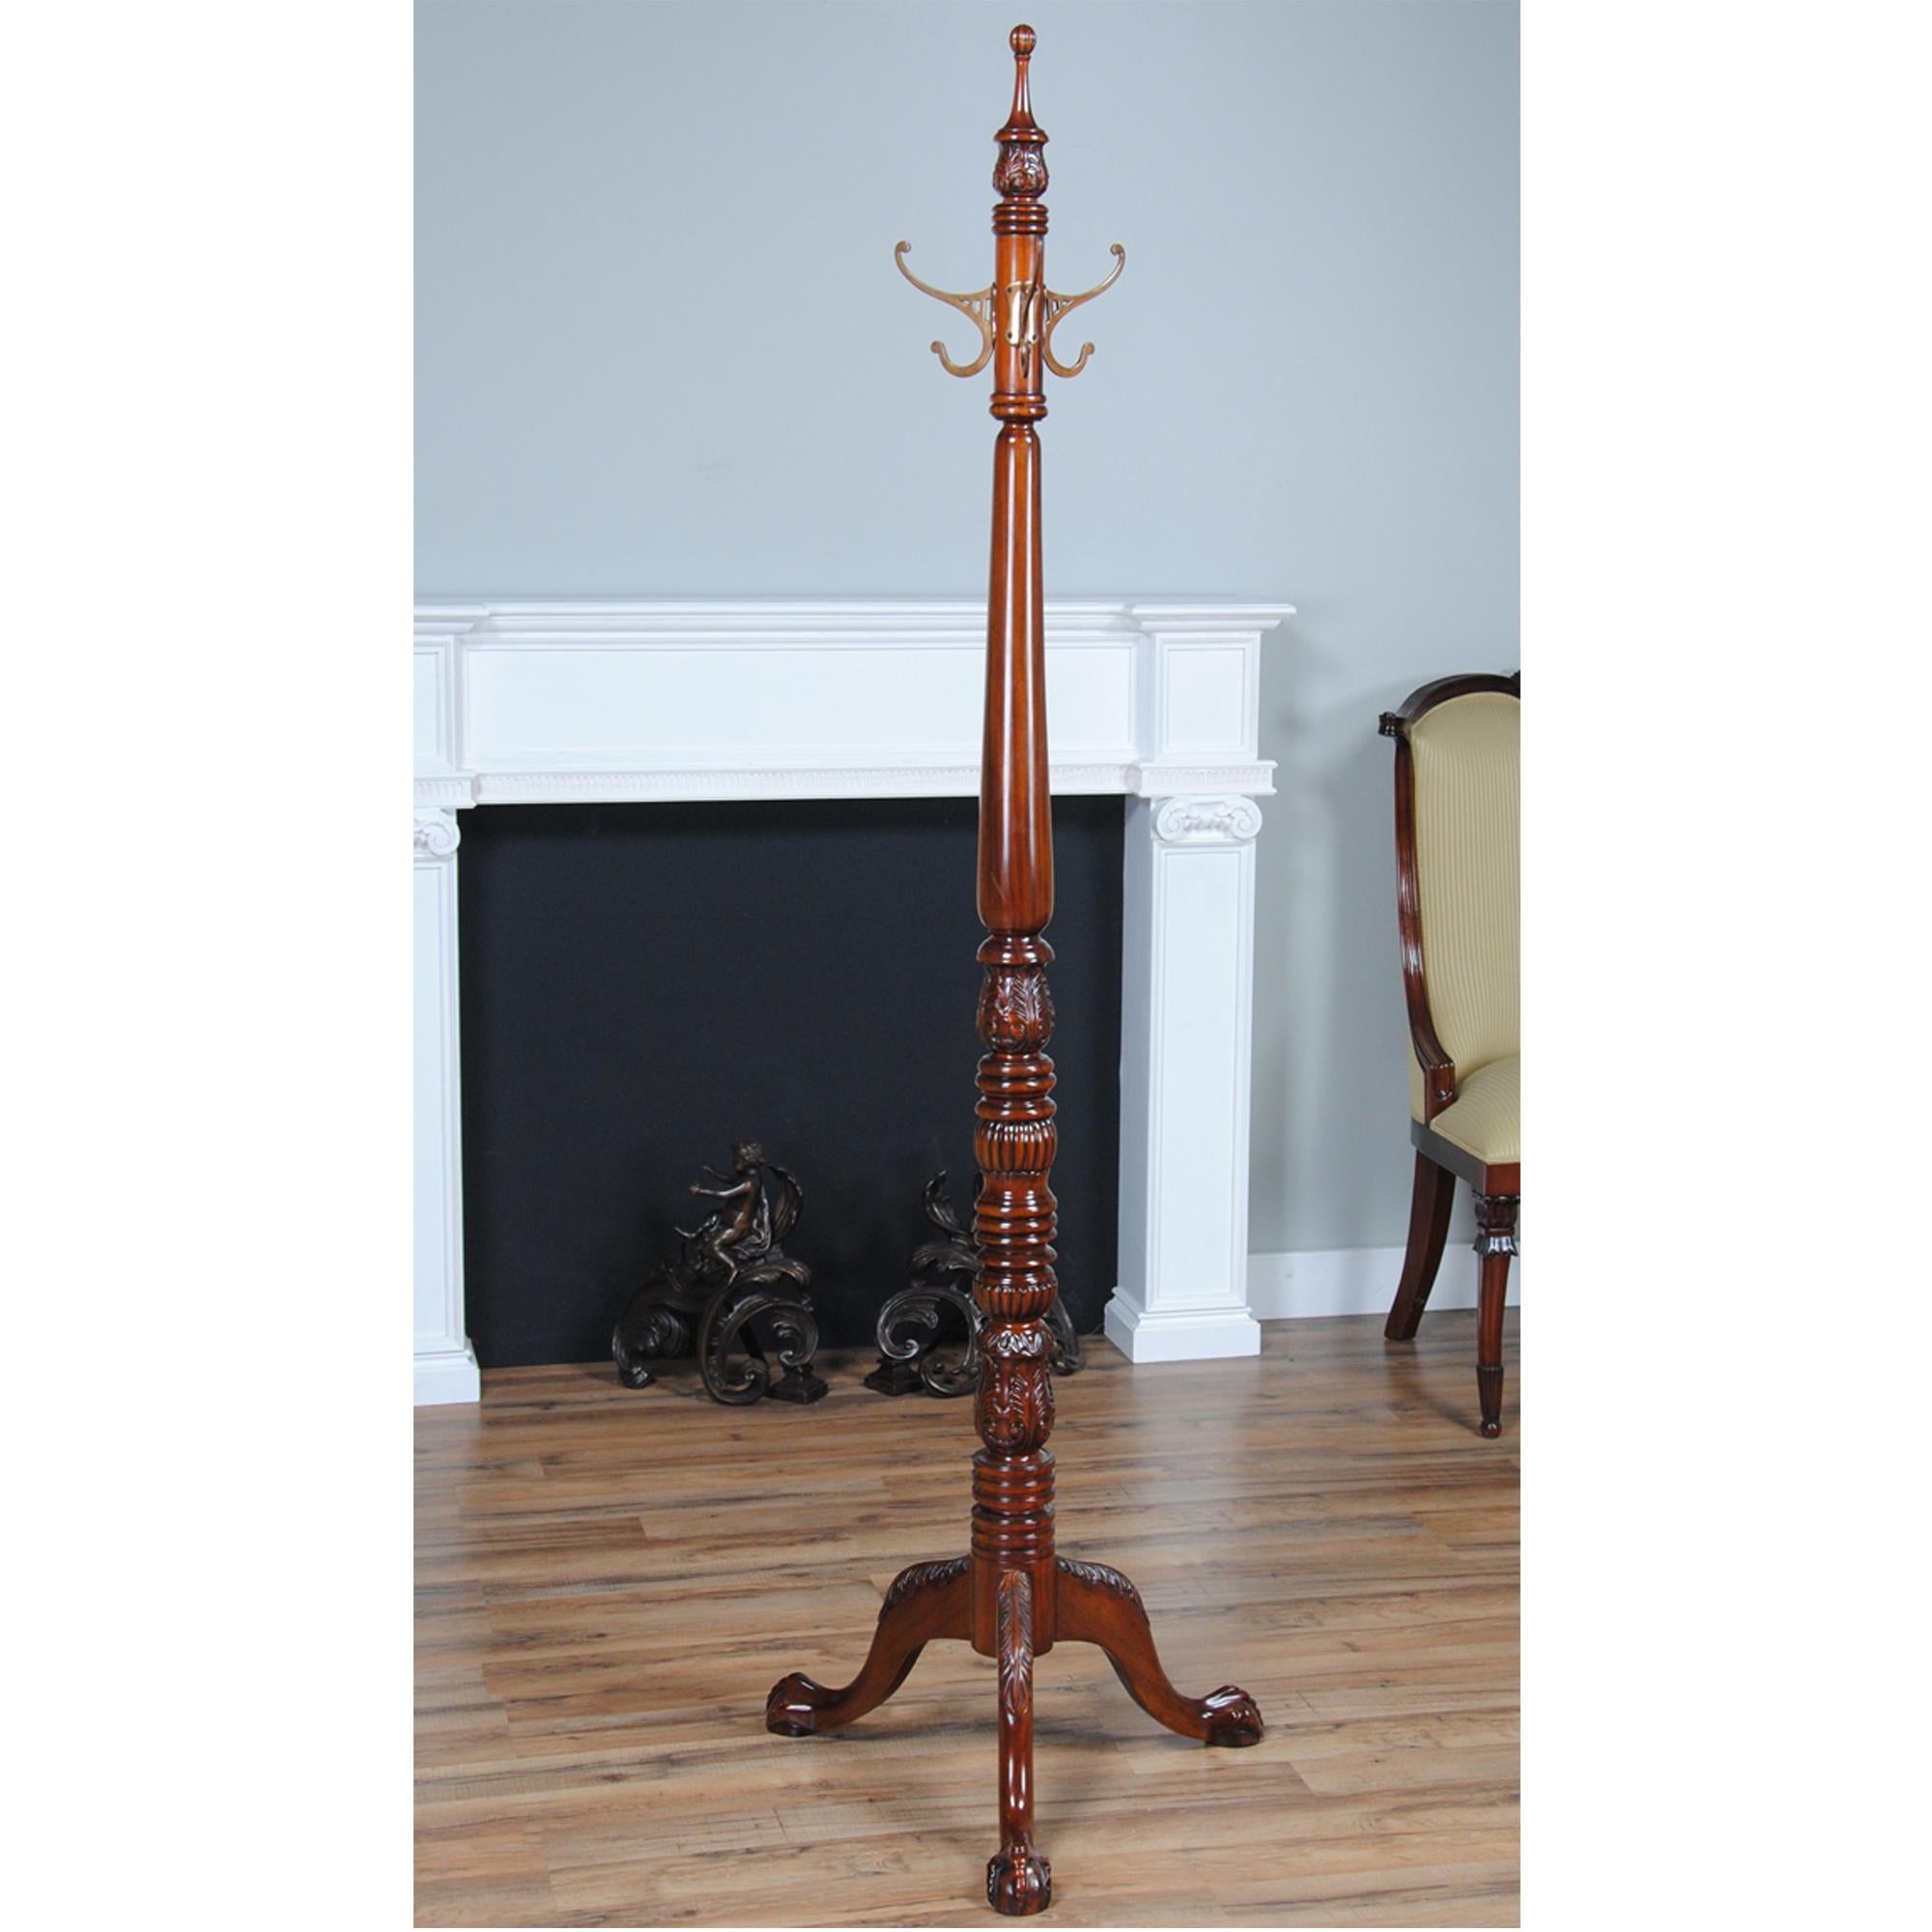 A solid mahogany Chippendale Coat Tree with Ball and Claw feet. The solid mahogany construction features hand carved details throughout. The mahogany is harvested from plantation grown, sustainably harvested trees and the carvings are executed by